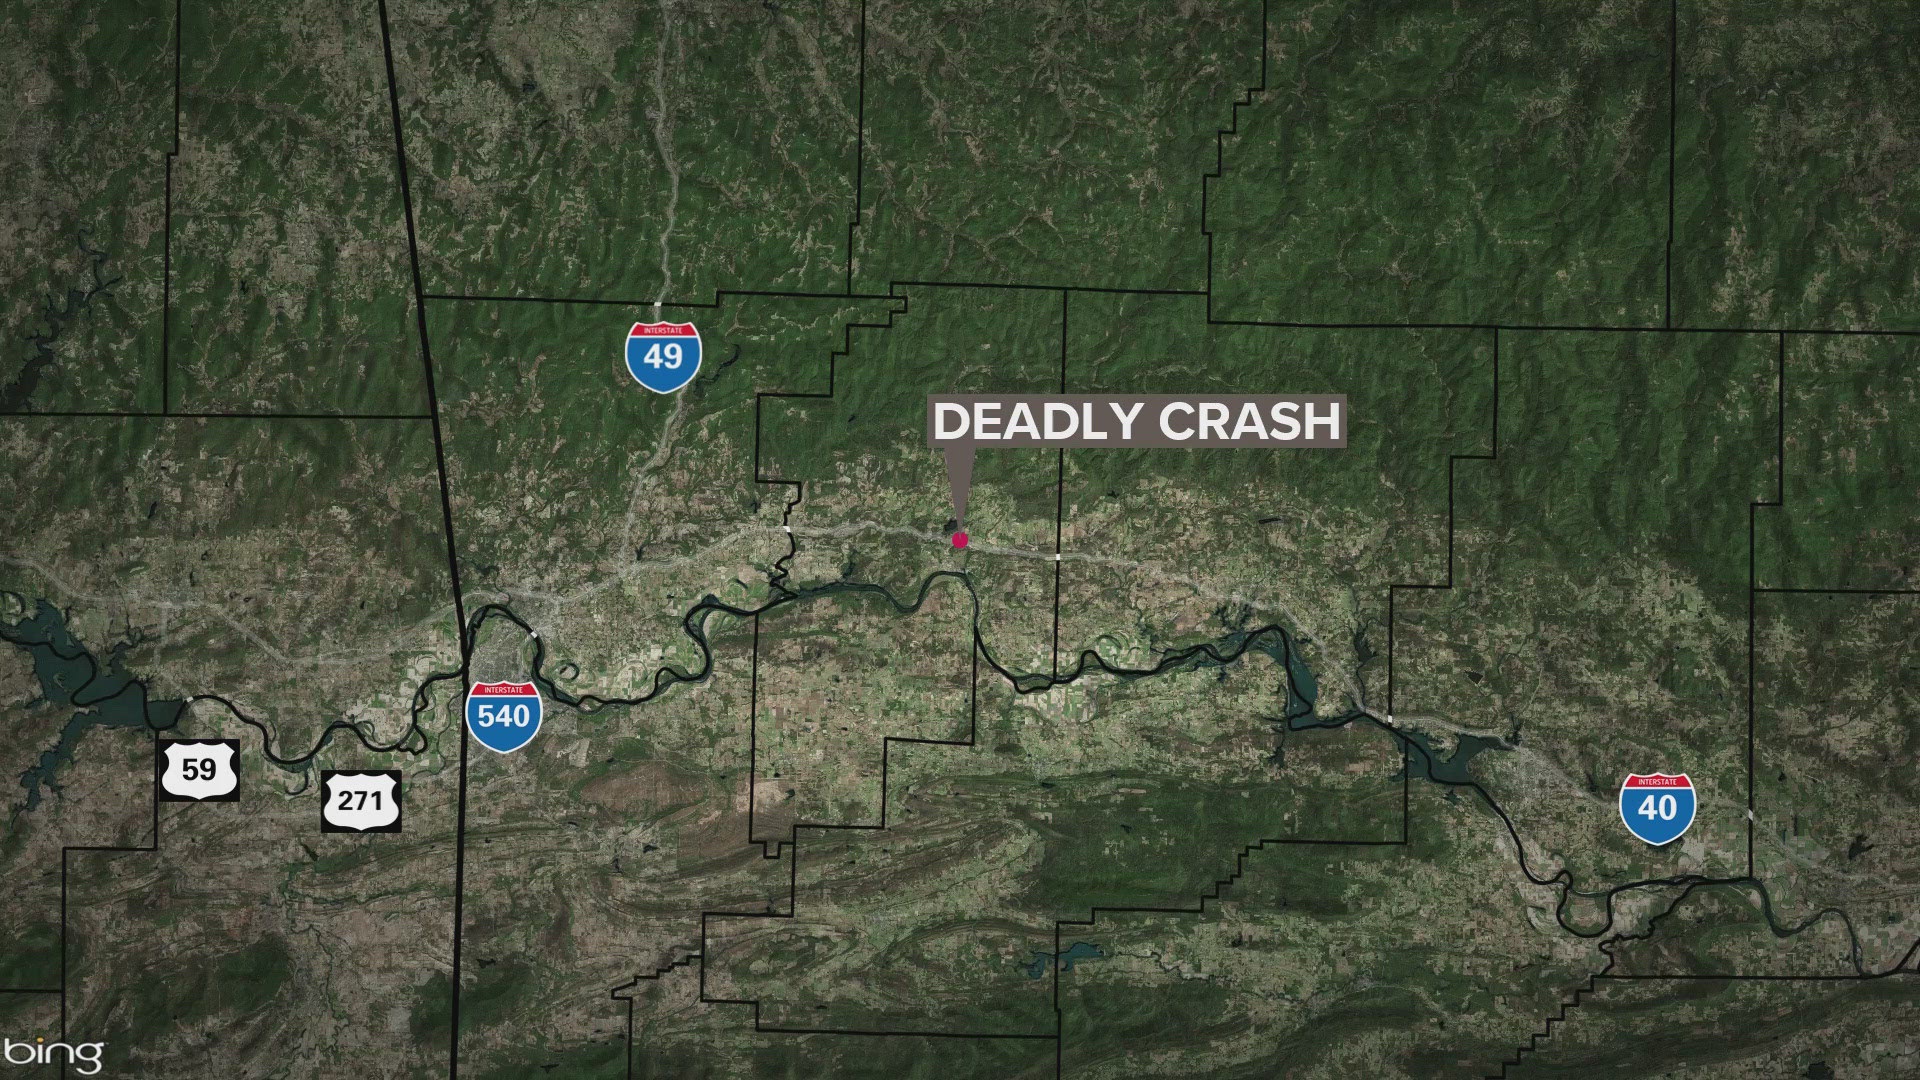 WE'VE JUST LEARNED THAT THREE PEOPLE DIED IN A CAR CRASH IN OZARK THIS MORNING...